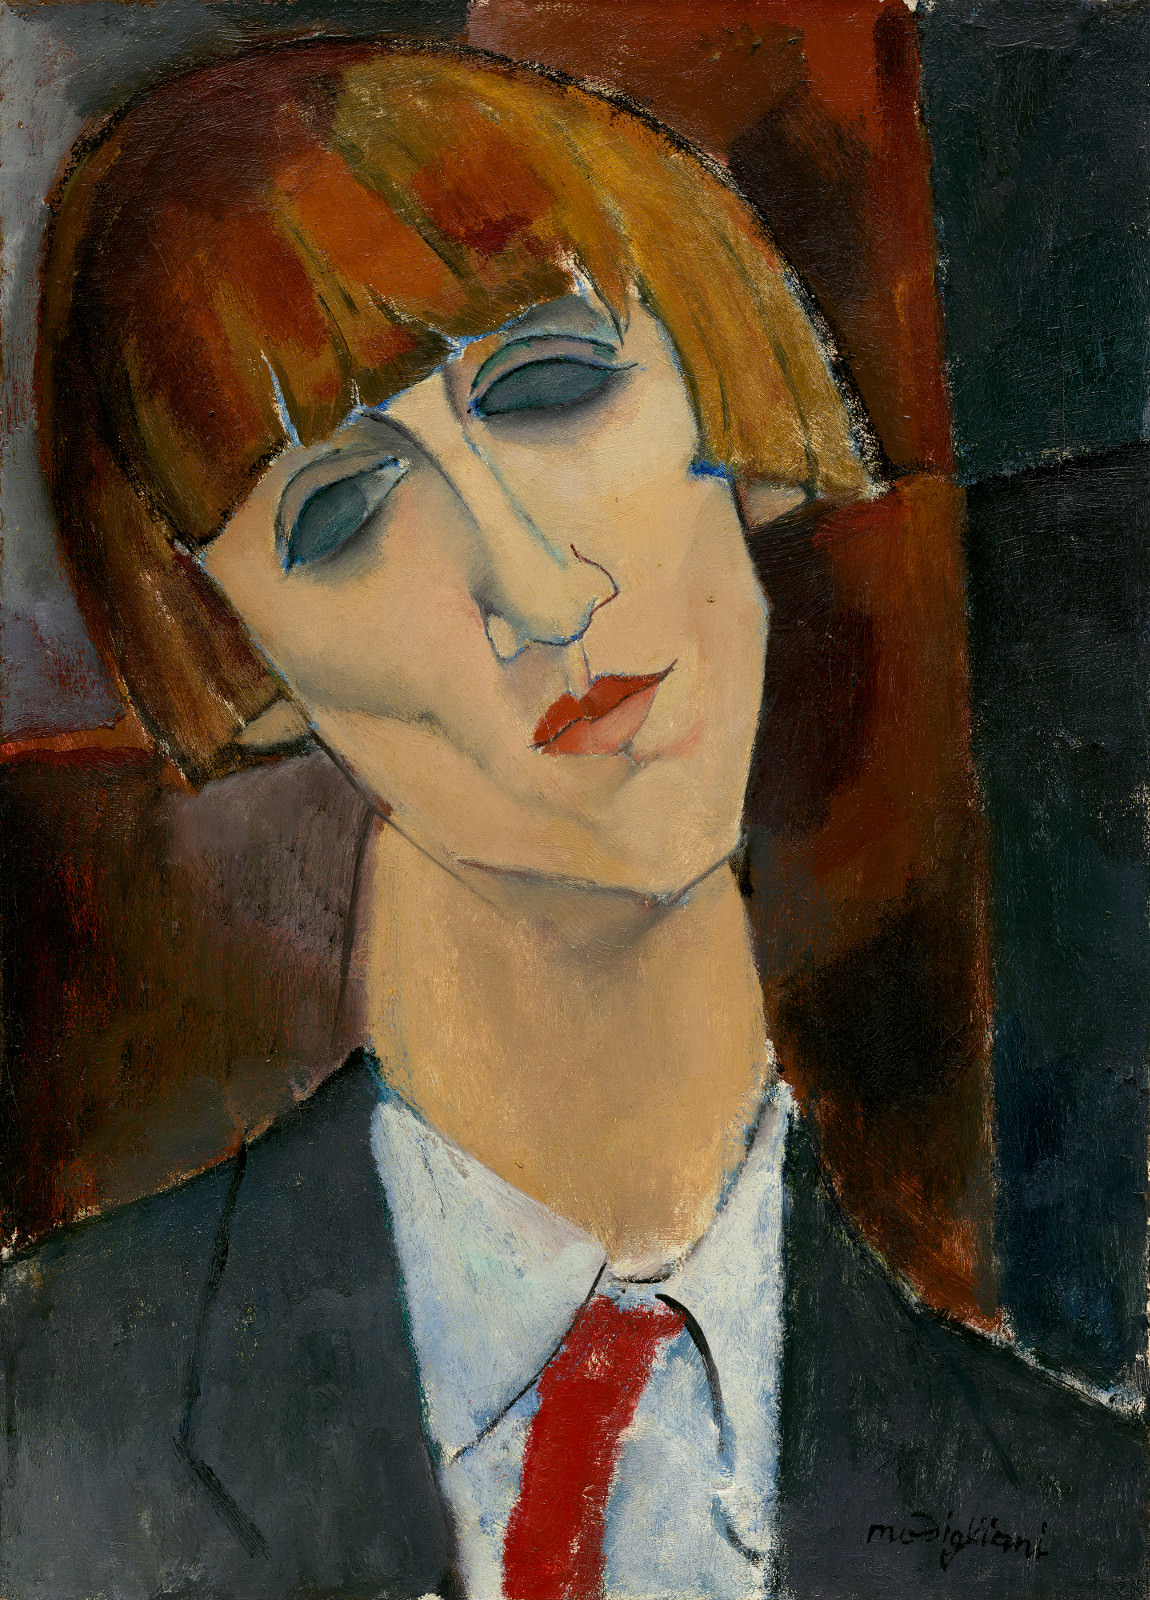 Fig. 7 – Madamme Kisling, Amedeo Modigliani, 1917, oil on canvas, 46,2 x 33,2 cm. National Gallery of Art, Washington. Chester Dale Collection.